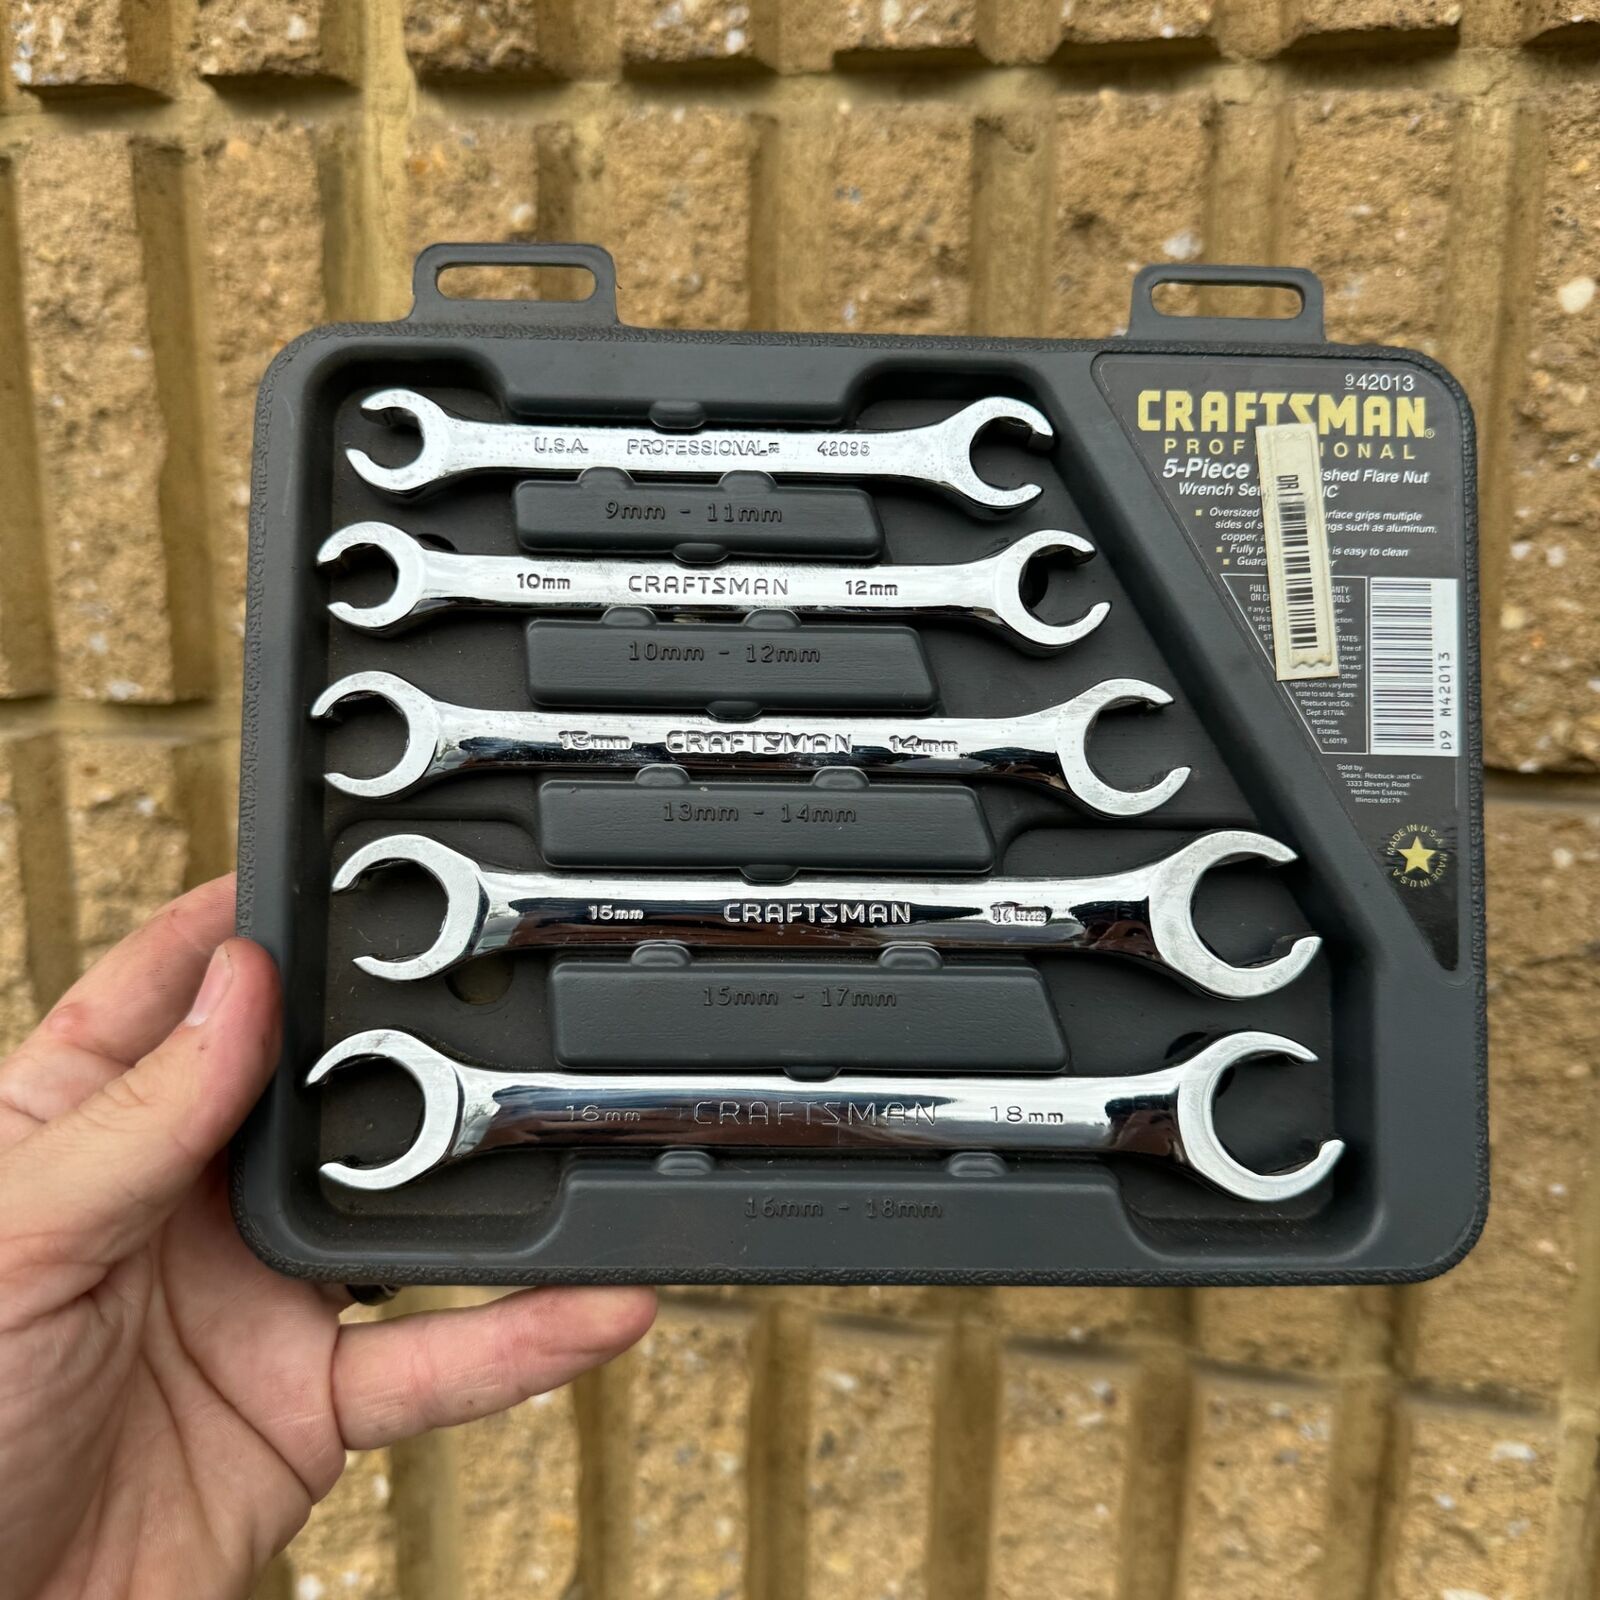 CRAFTSMAN USA Professional 9 42013 METRIC 5pc Flare Nut Line Wrench Set 9mm-18mm